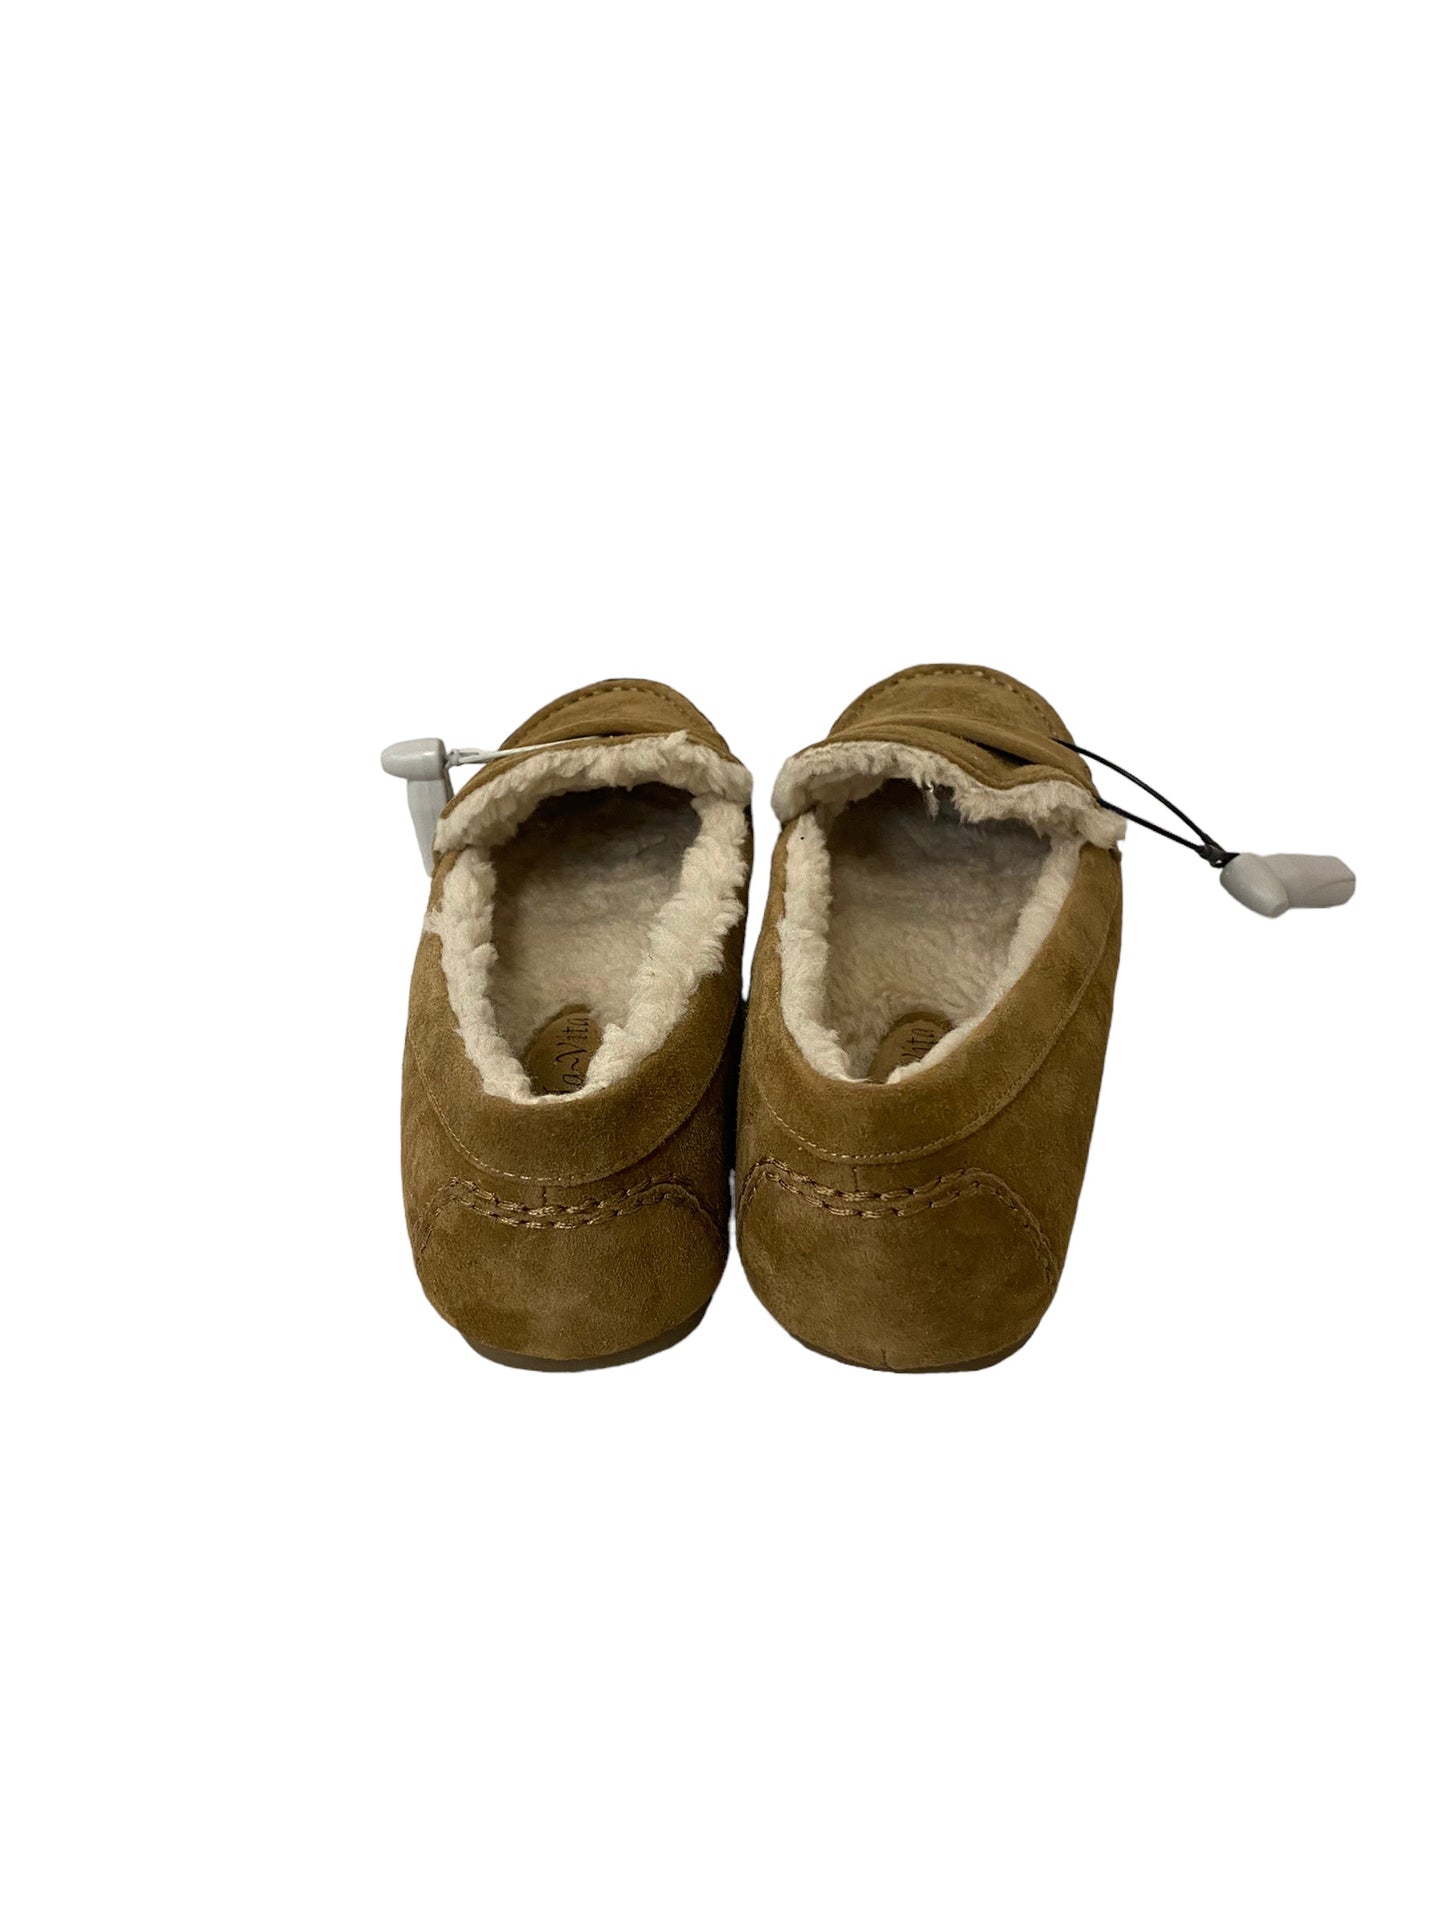 Shoes Flats Moccasin By Clothes Mentor  Size: 8.5